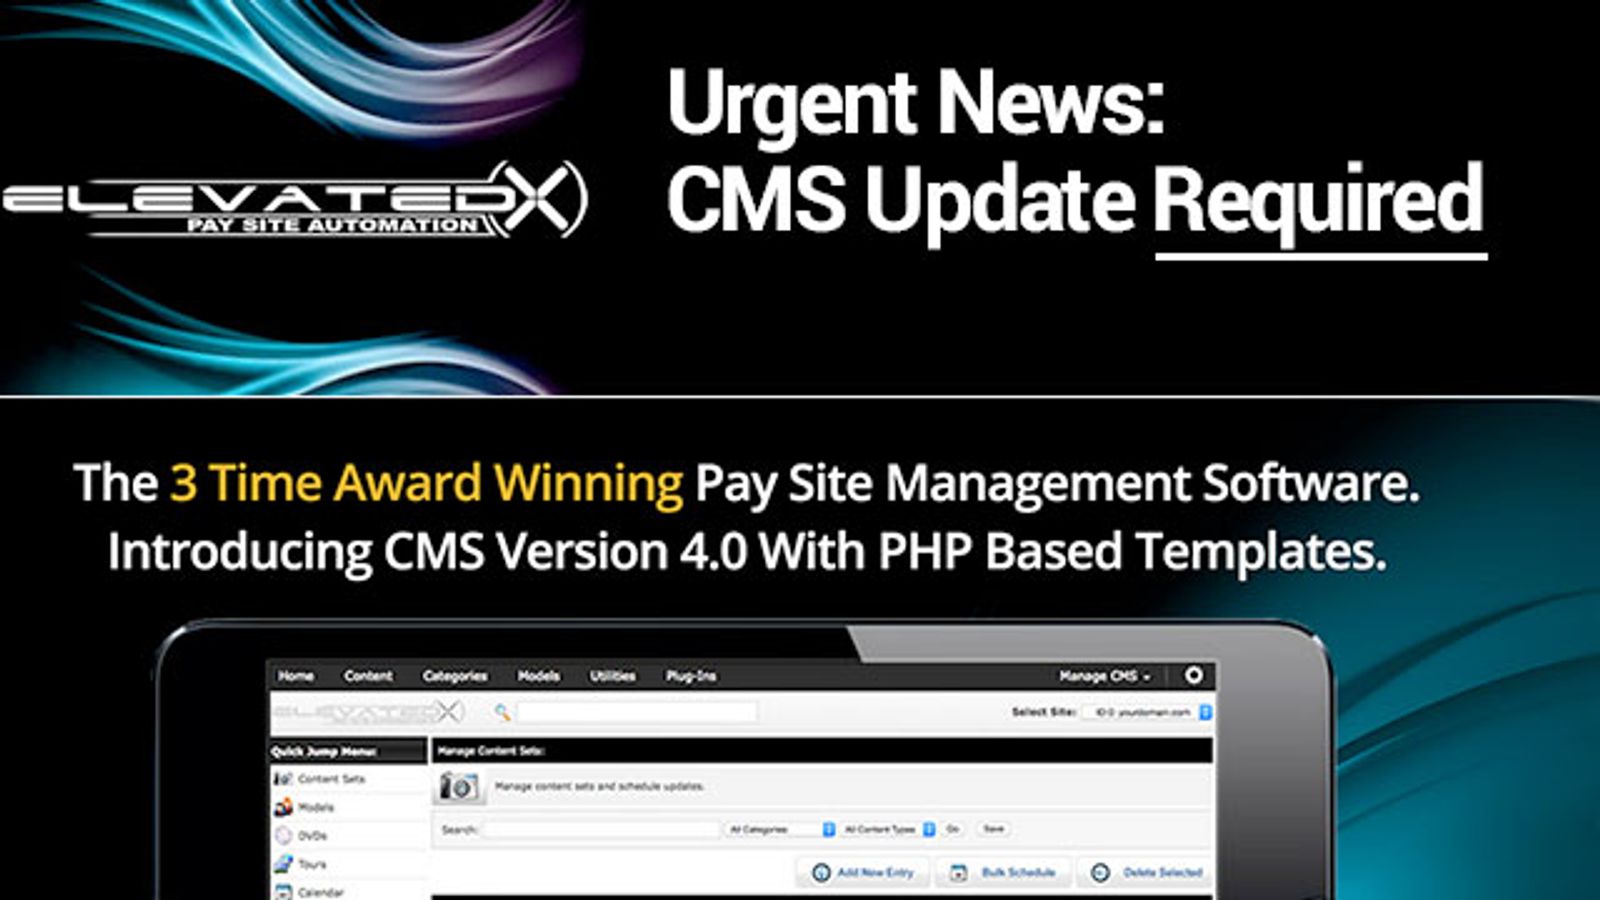 Elevated X Urges Clients to Complete Mandatory CMS Update